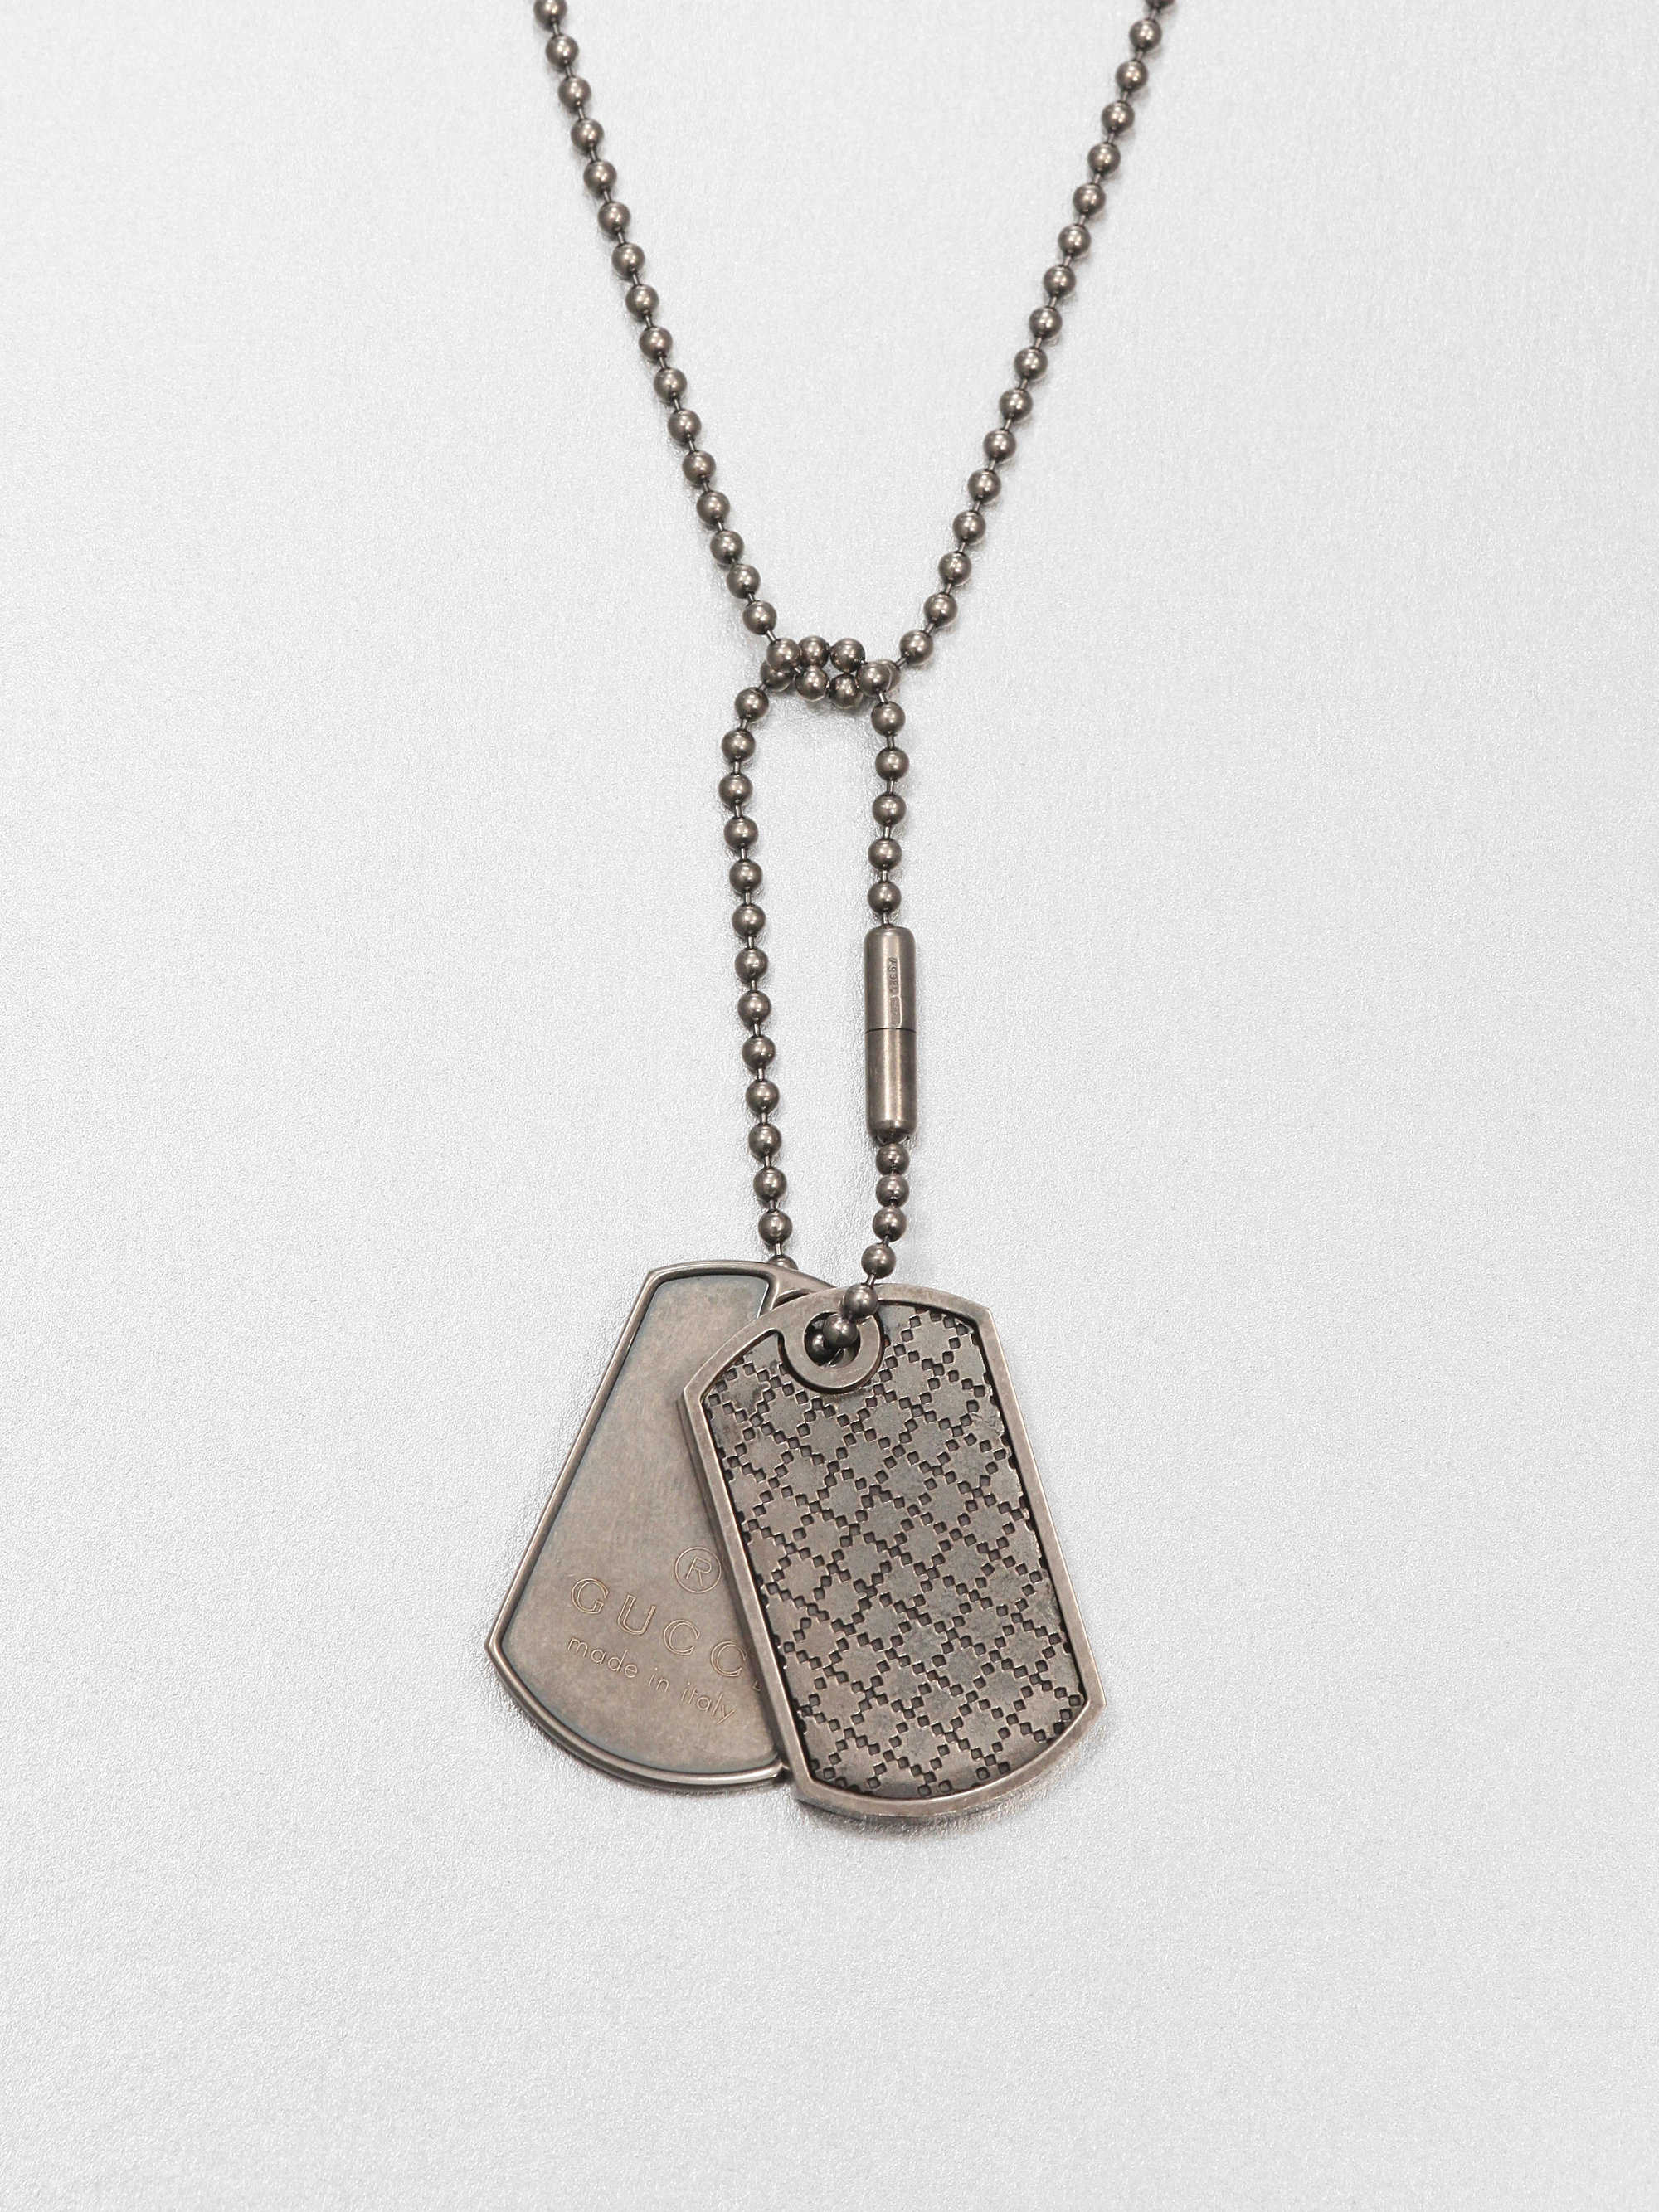 gucci necklace dog tag